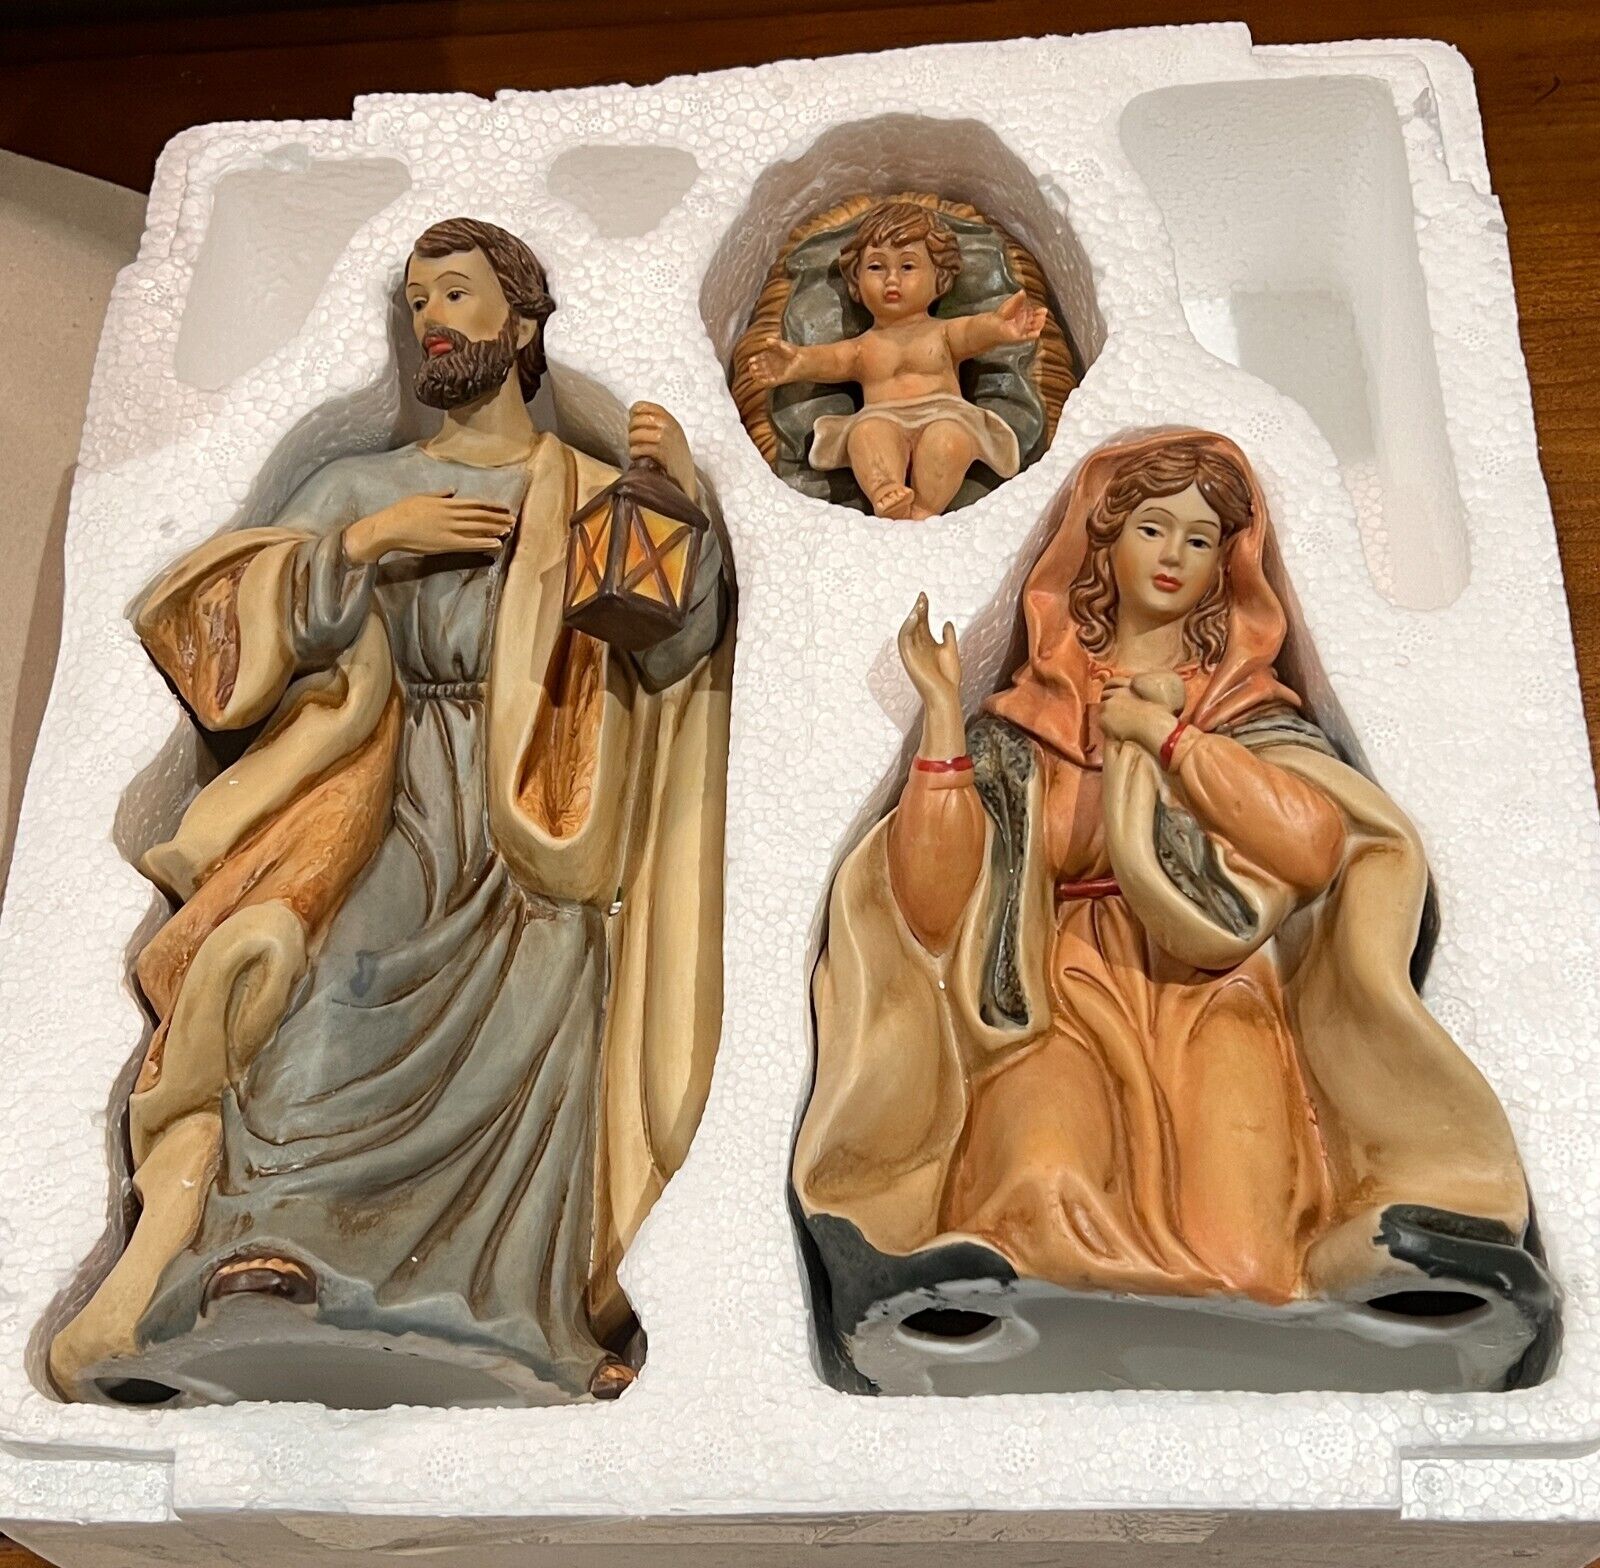 Heritage 3 Piece Nativity Set The Holy Family Porcelain Hand-Painted with Box